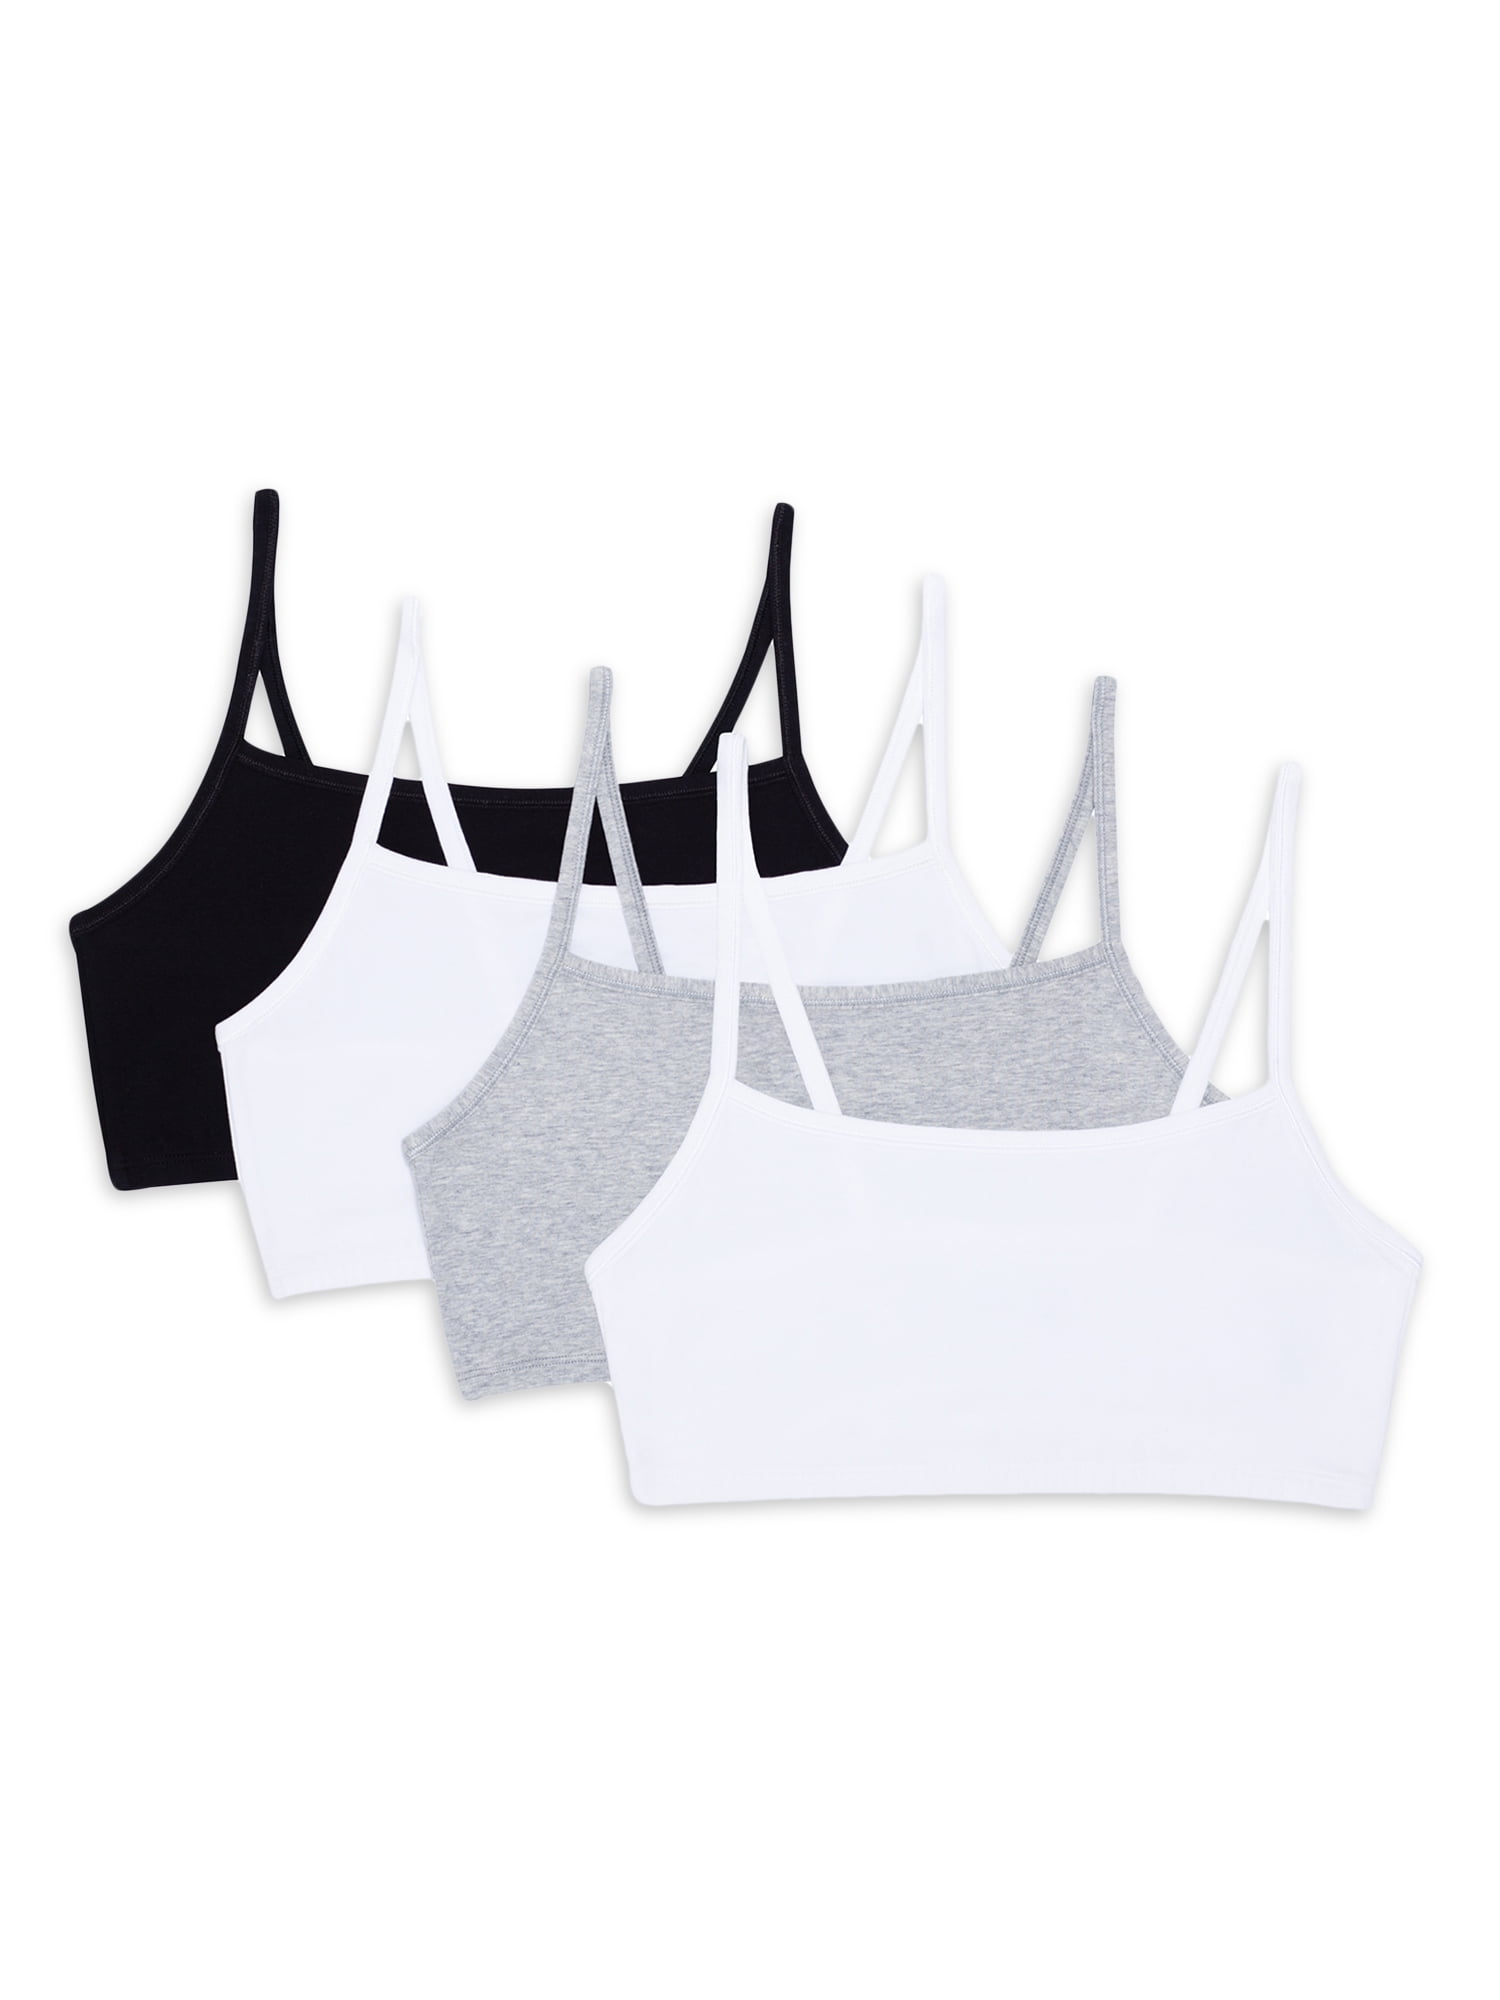 Fruit of the Loom Women's Medium Impact Sports Bras Supports Without Padding